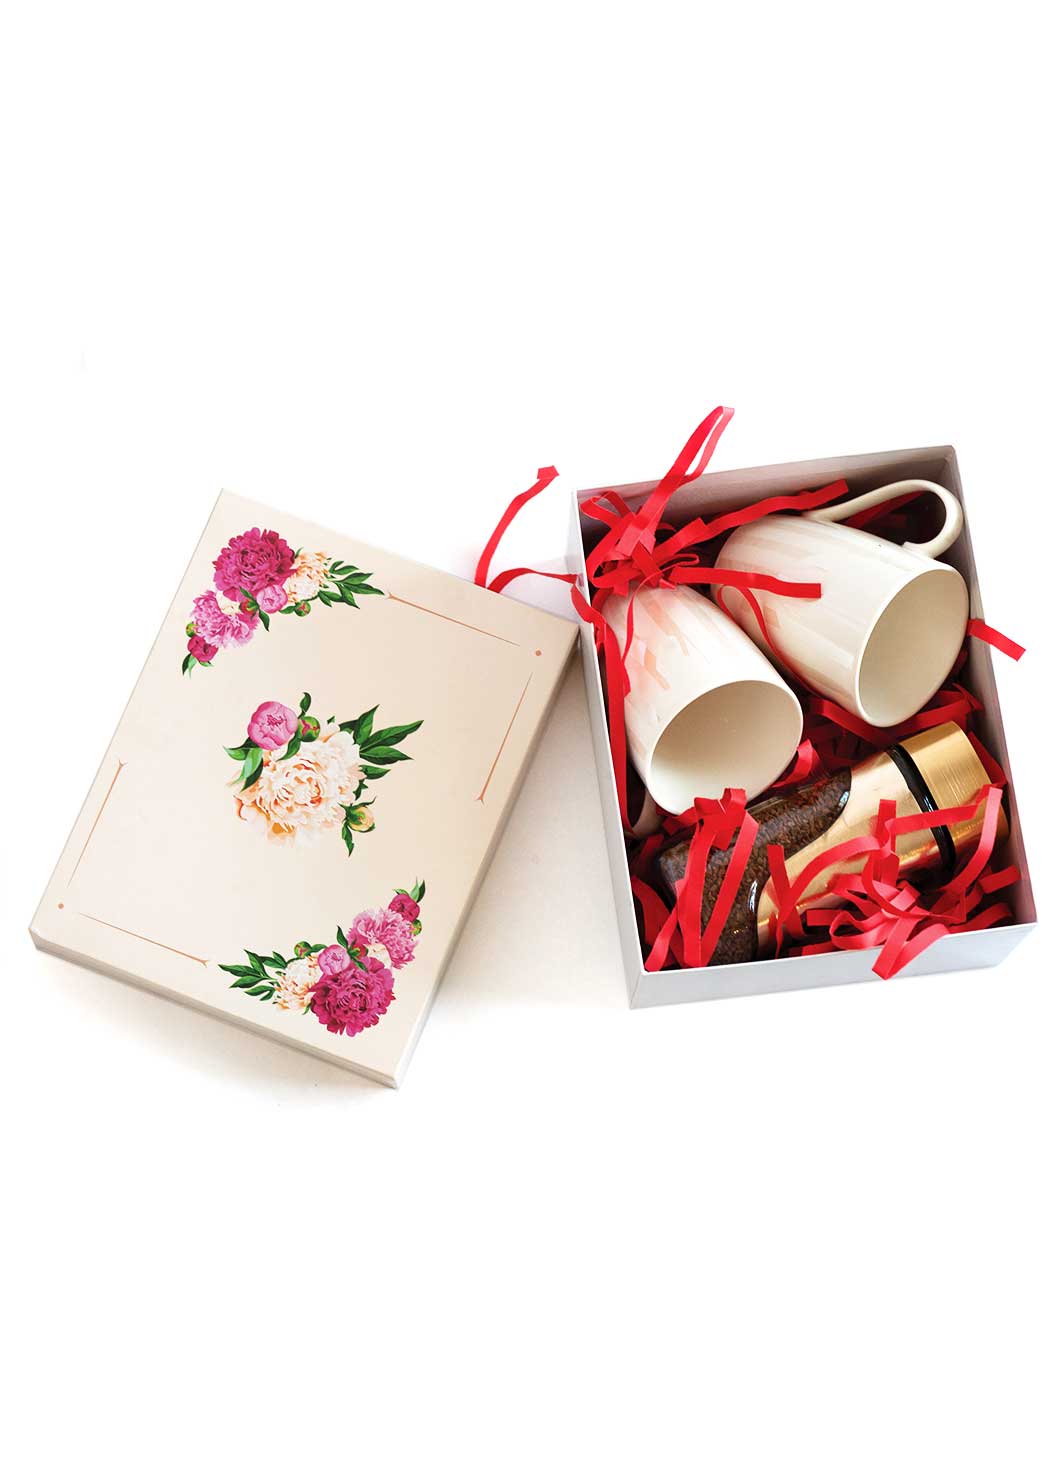 gift packing box flowers print on cover gift box for gift packing- mugs packaging gift box - 10 inch square gift box